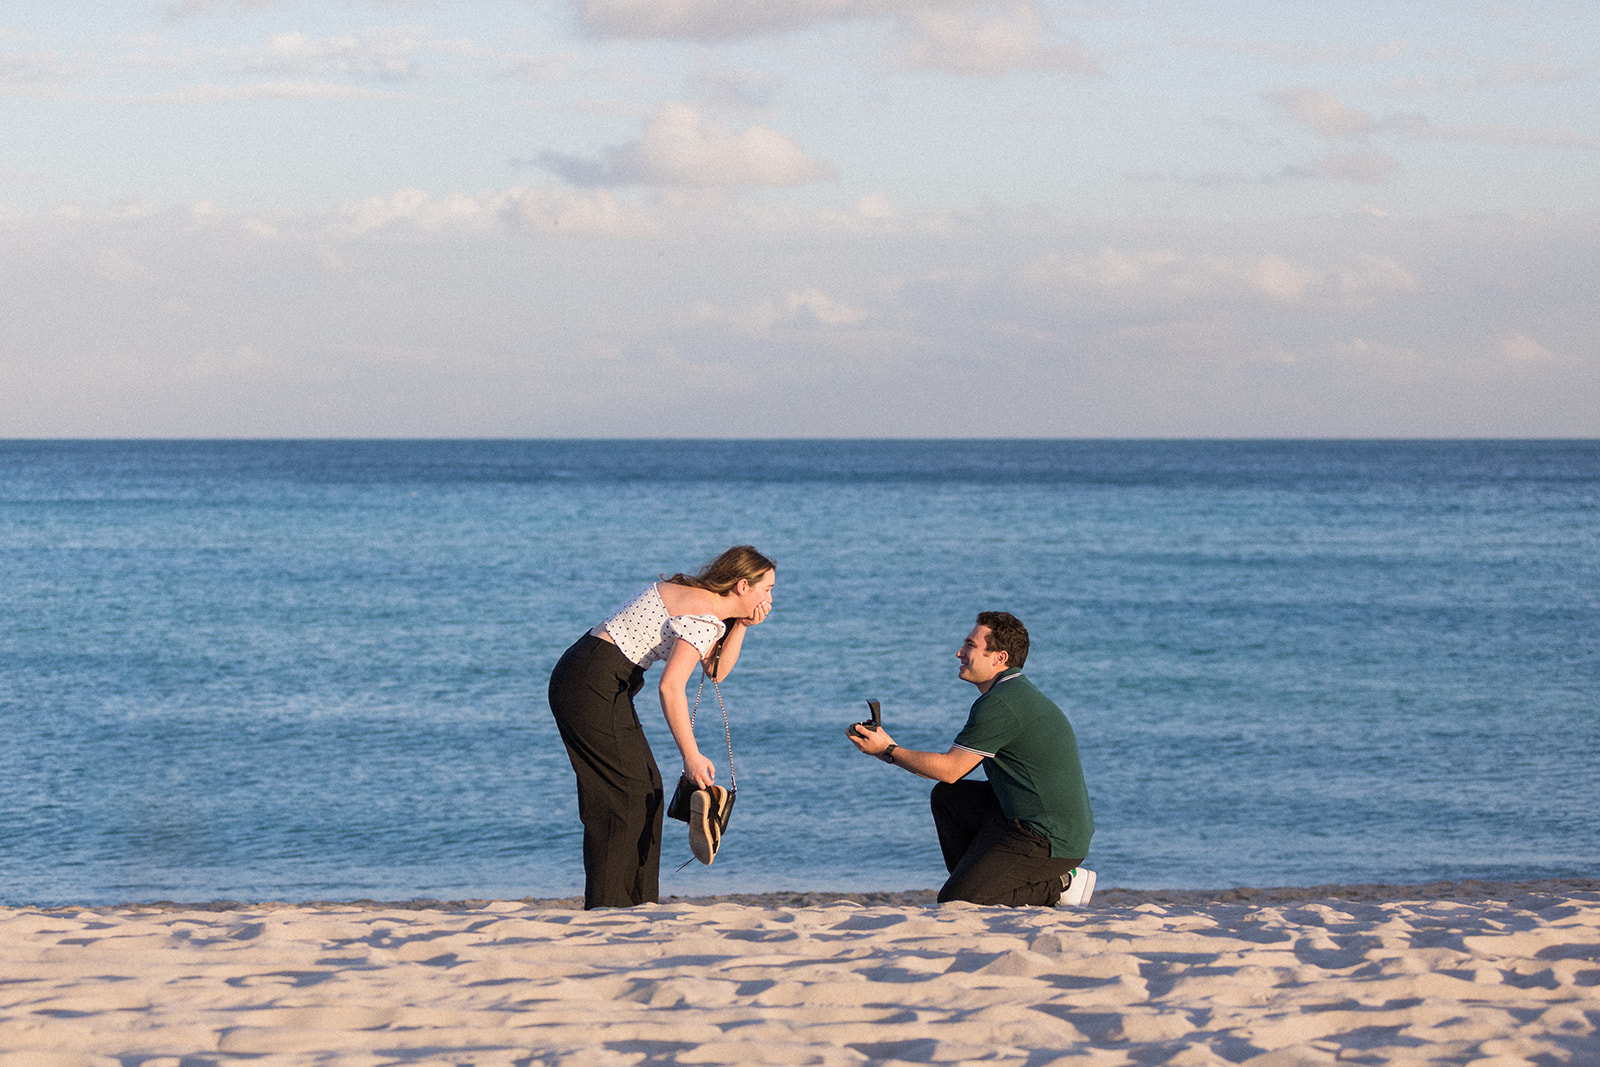 How to propose in Miami?
